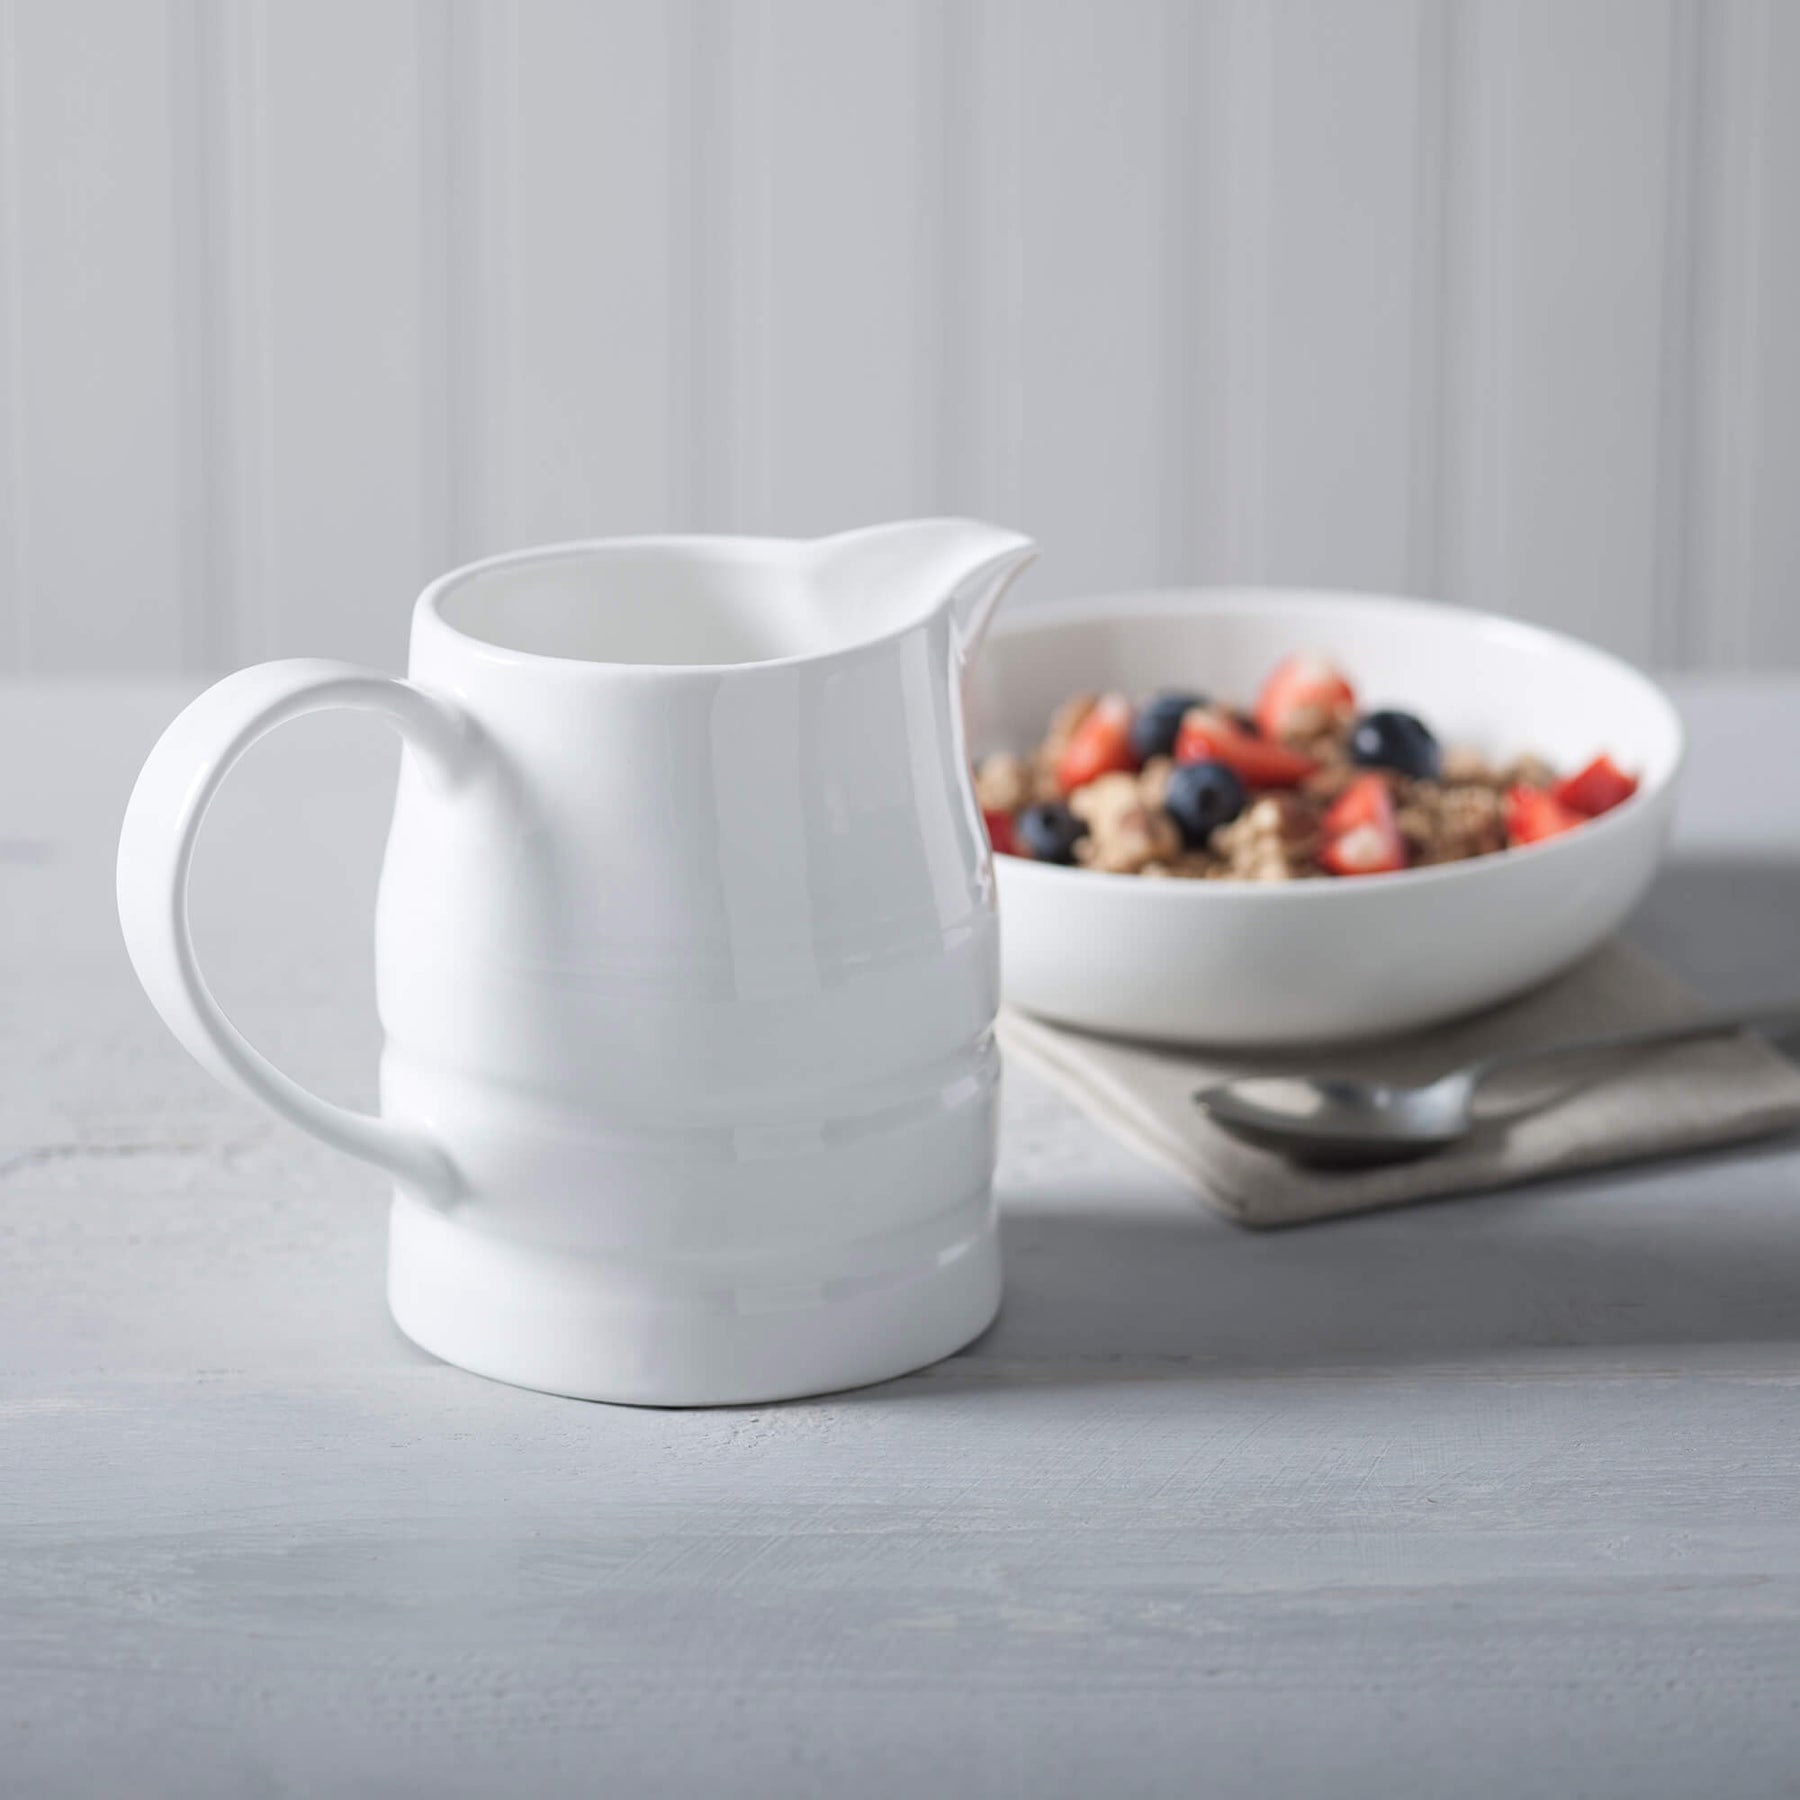 Porcelain Traditional Churn Jug, Available in 5 Sizes